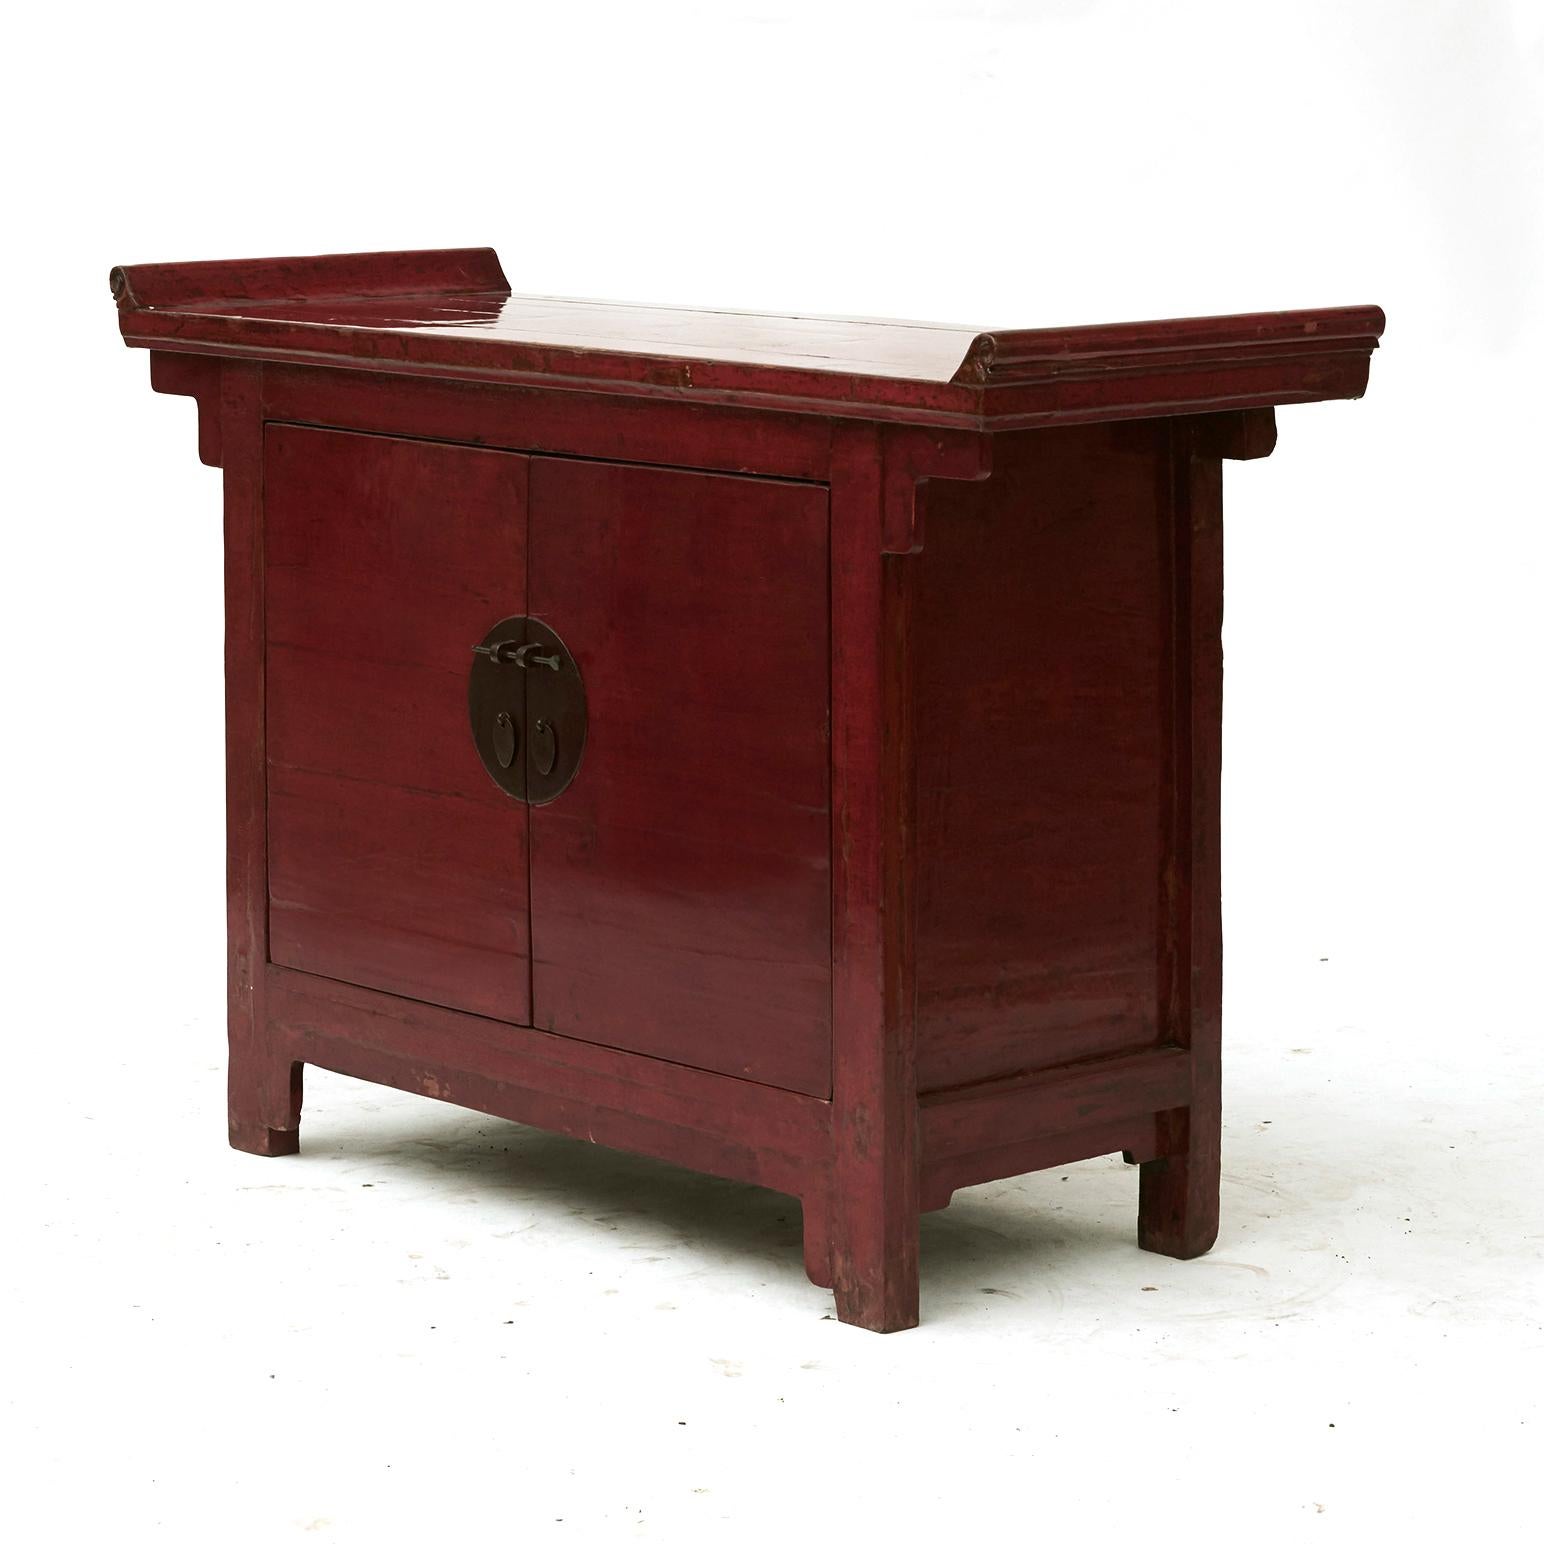 A Chinese Ming Dynasty style altar cabinet with original red lacquer, with natural age-related patina.
The cabinet features a rectangular top with everted flanges, sitting above a façade presenting a pair of double doors fitted with a traditional